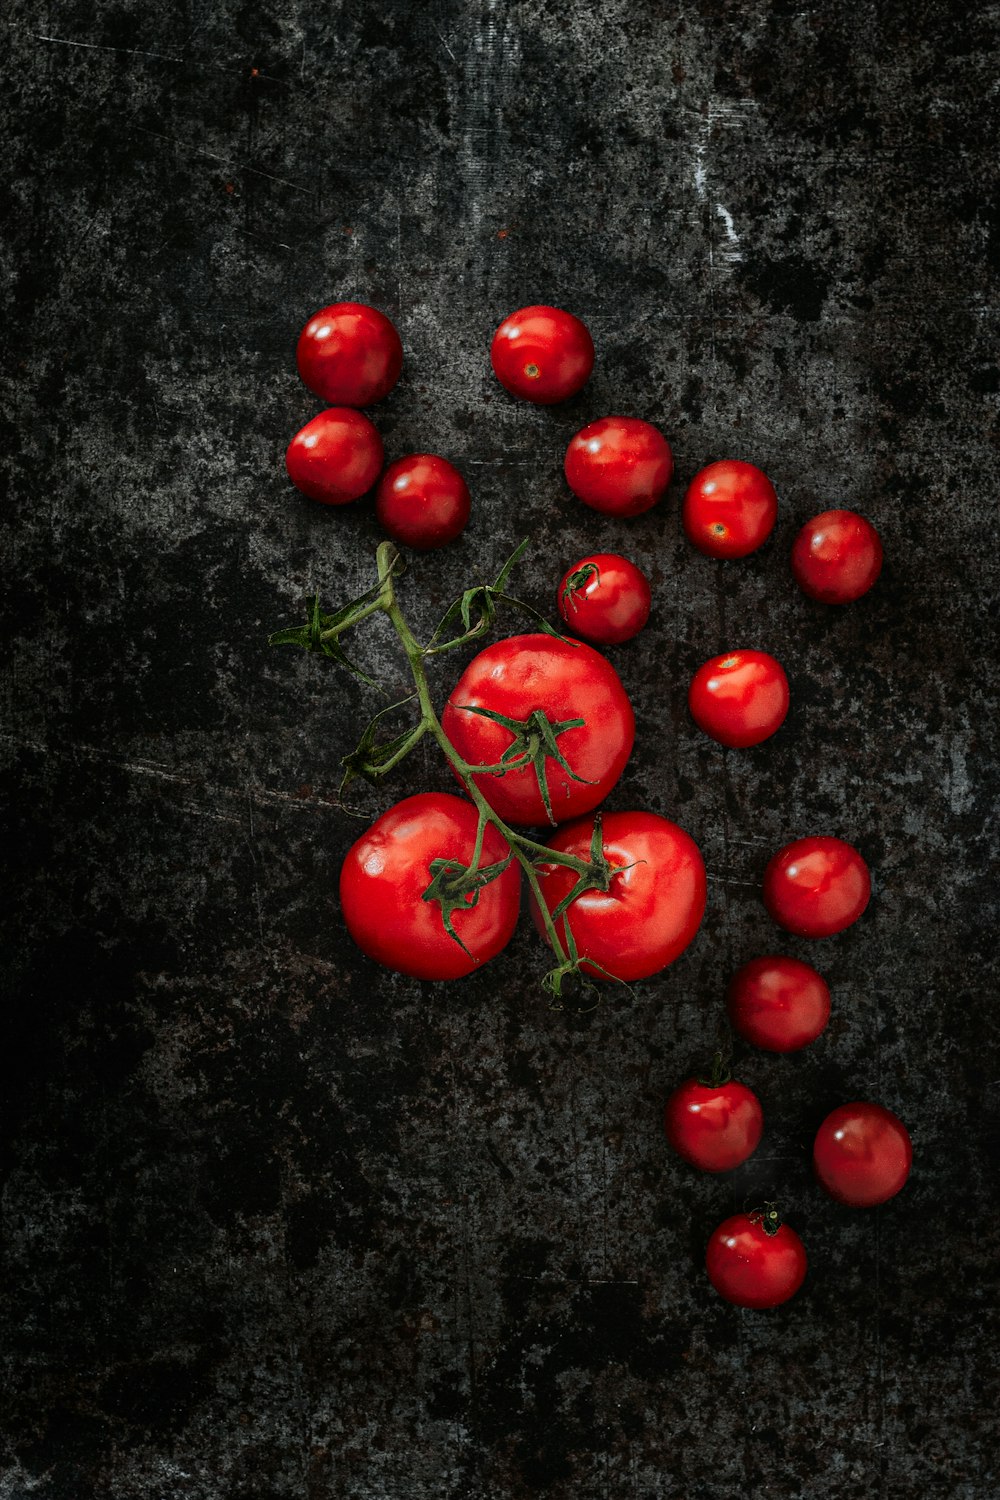 red cherry tomatoes on black surface - why does a tomato knife have two points